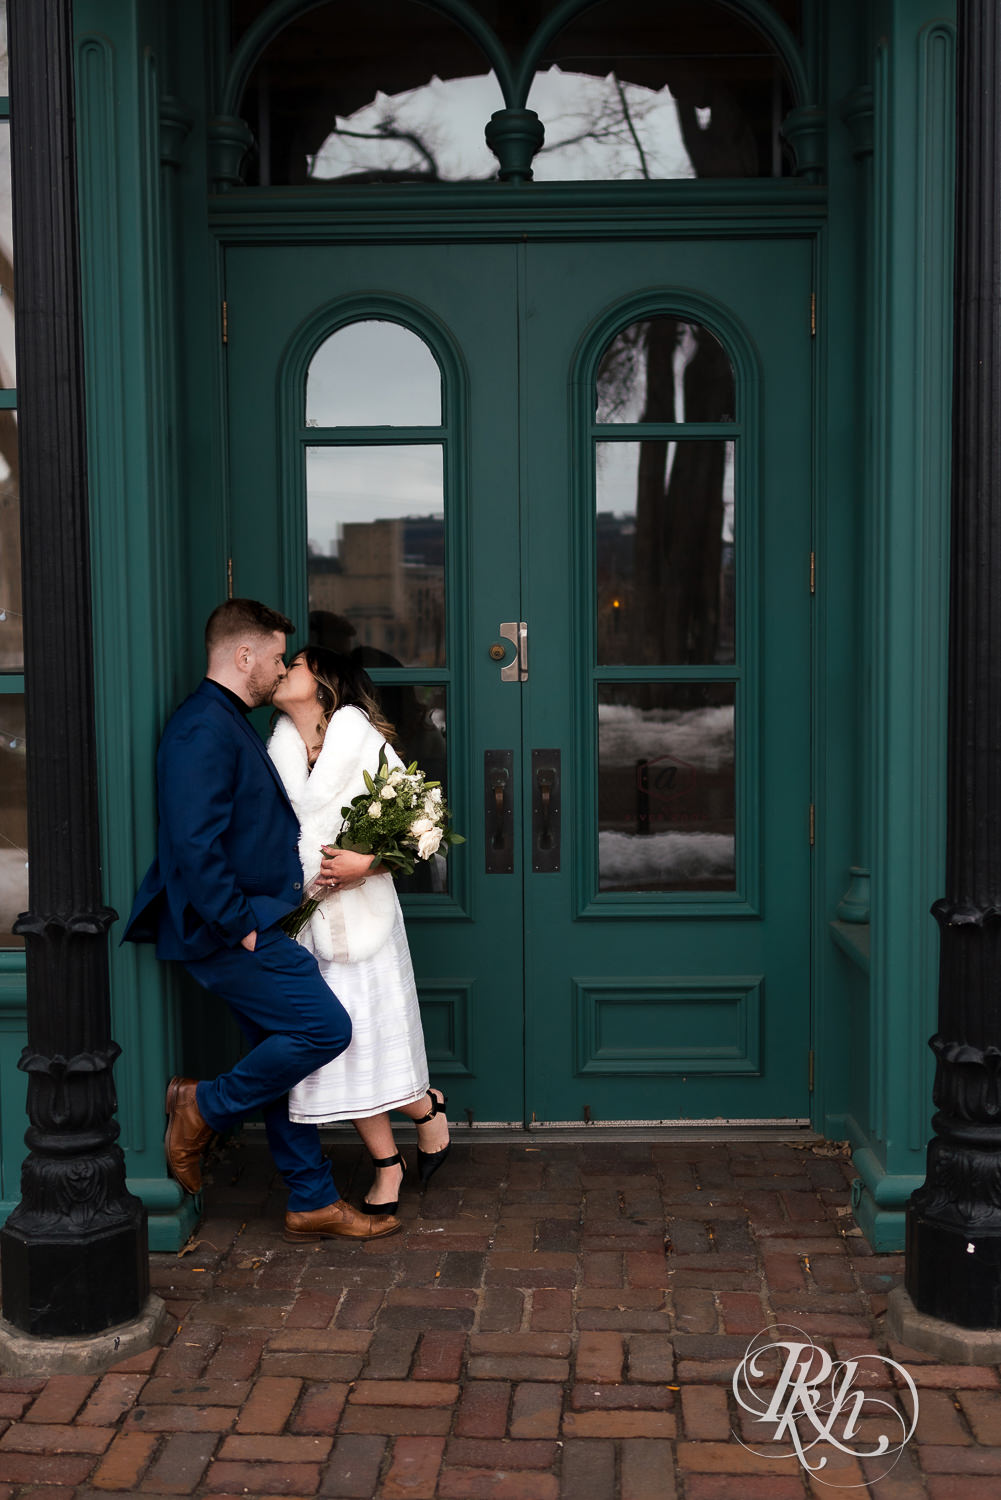 Man and Hmong woman kiss in front of door in Saint Anthony Main in Minneapolis, Minnesota.